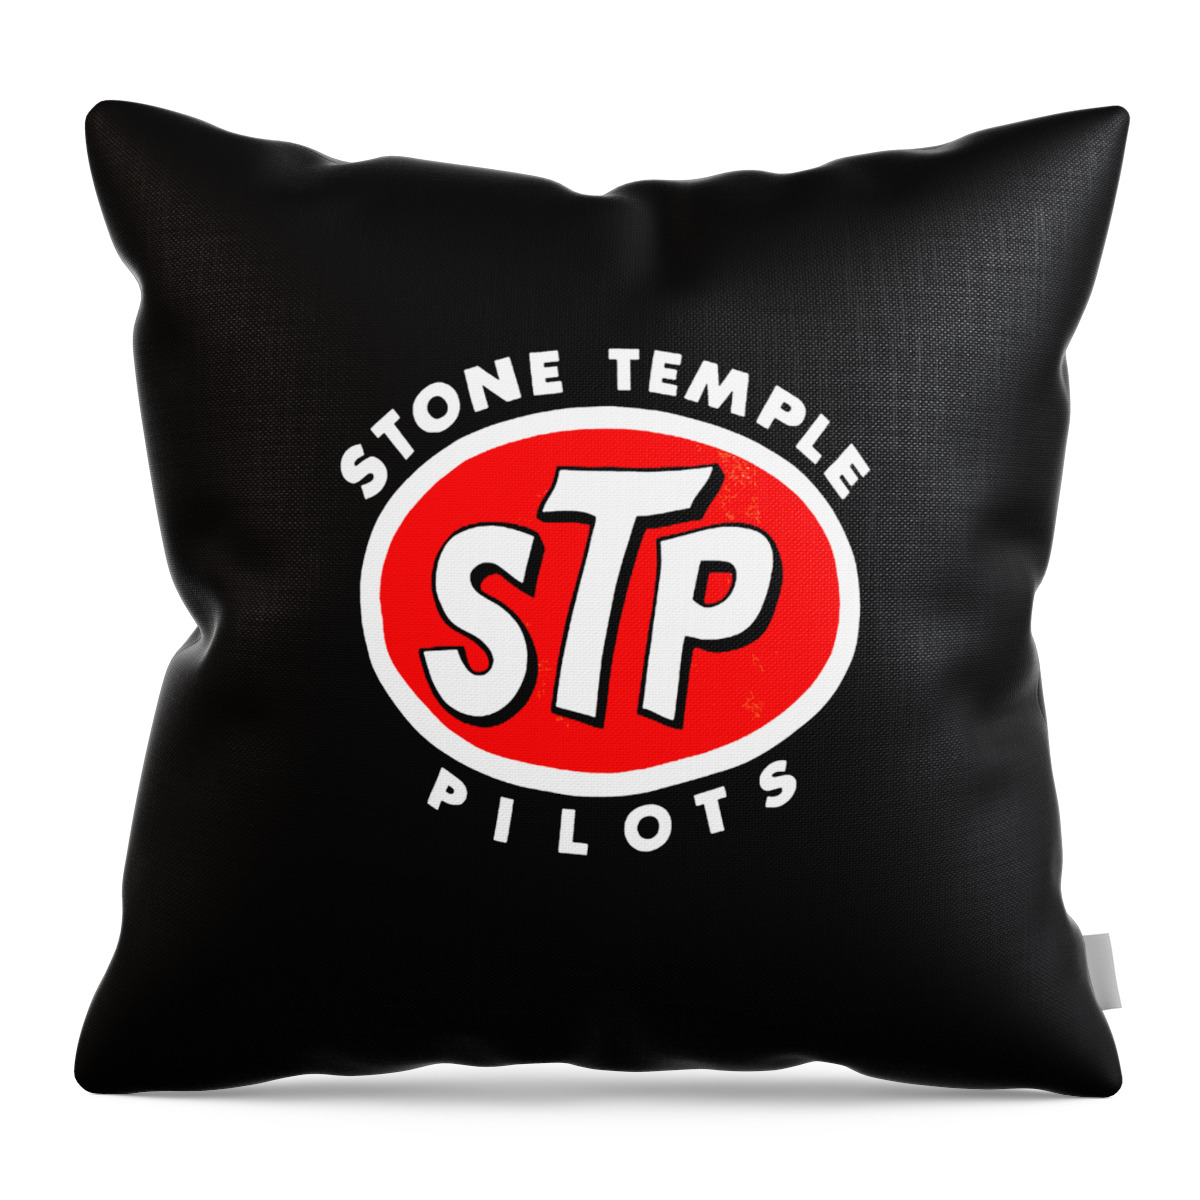 Stone Temple Pilots Is An American Rock Band Amazing07 From San Diego Throw Pillow featuring the digital art Rock Band Logo #15 by Rohmat lailul Wahid